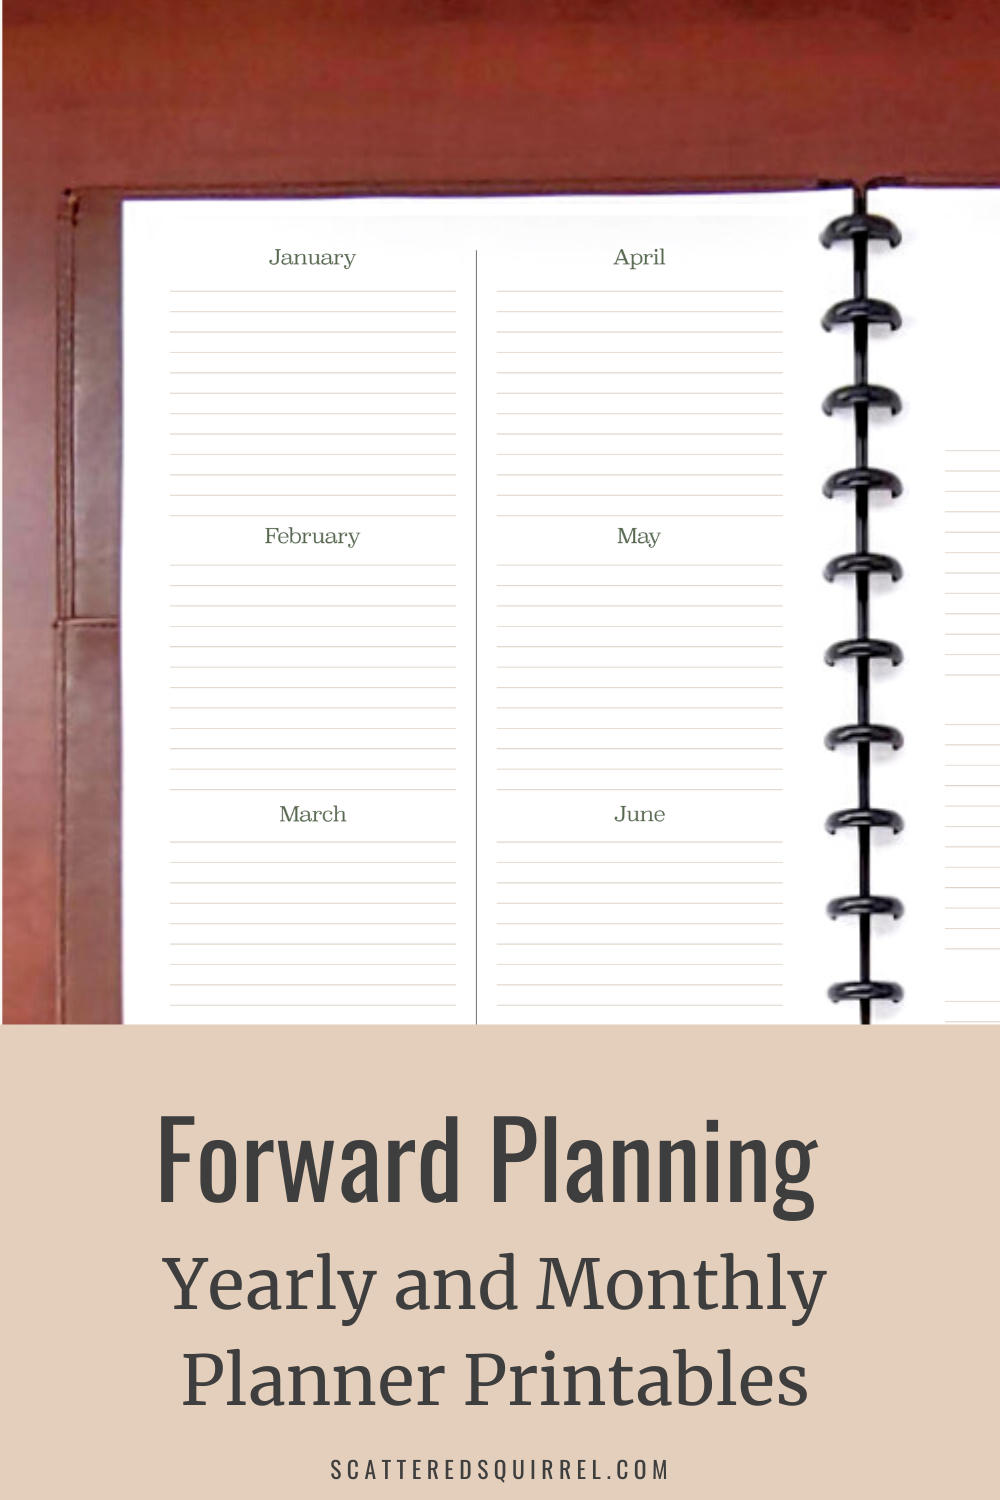 Image shows a brown leather planner open on a desk. The planner is bound with black disks. On the visible planner page are two columns with monthly headings dividing the columns into 3 sections each. The text says "Forward Planning - Yearly and Monthly Planner Printables"